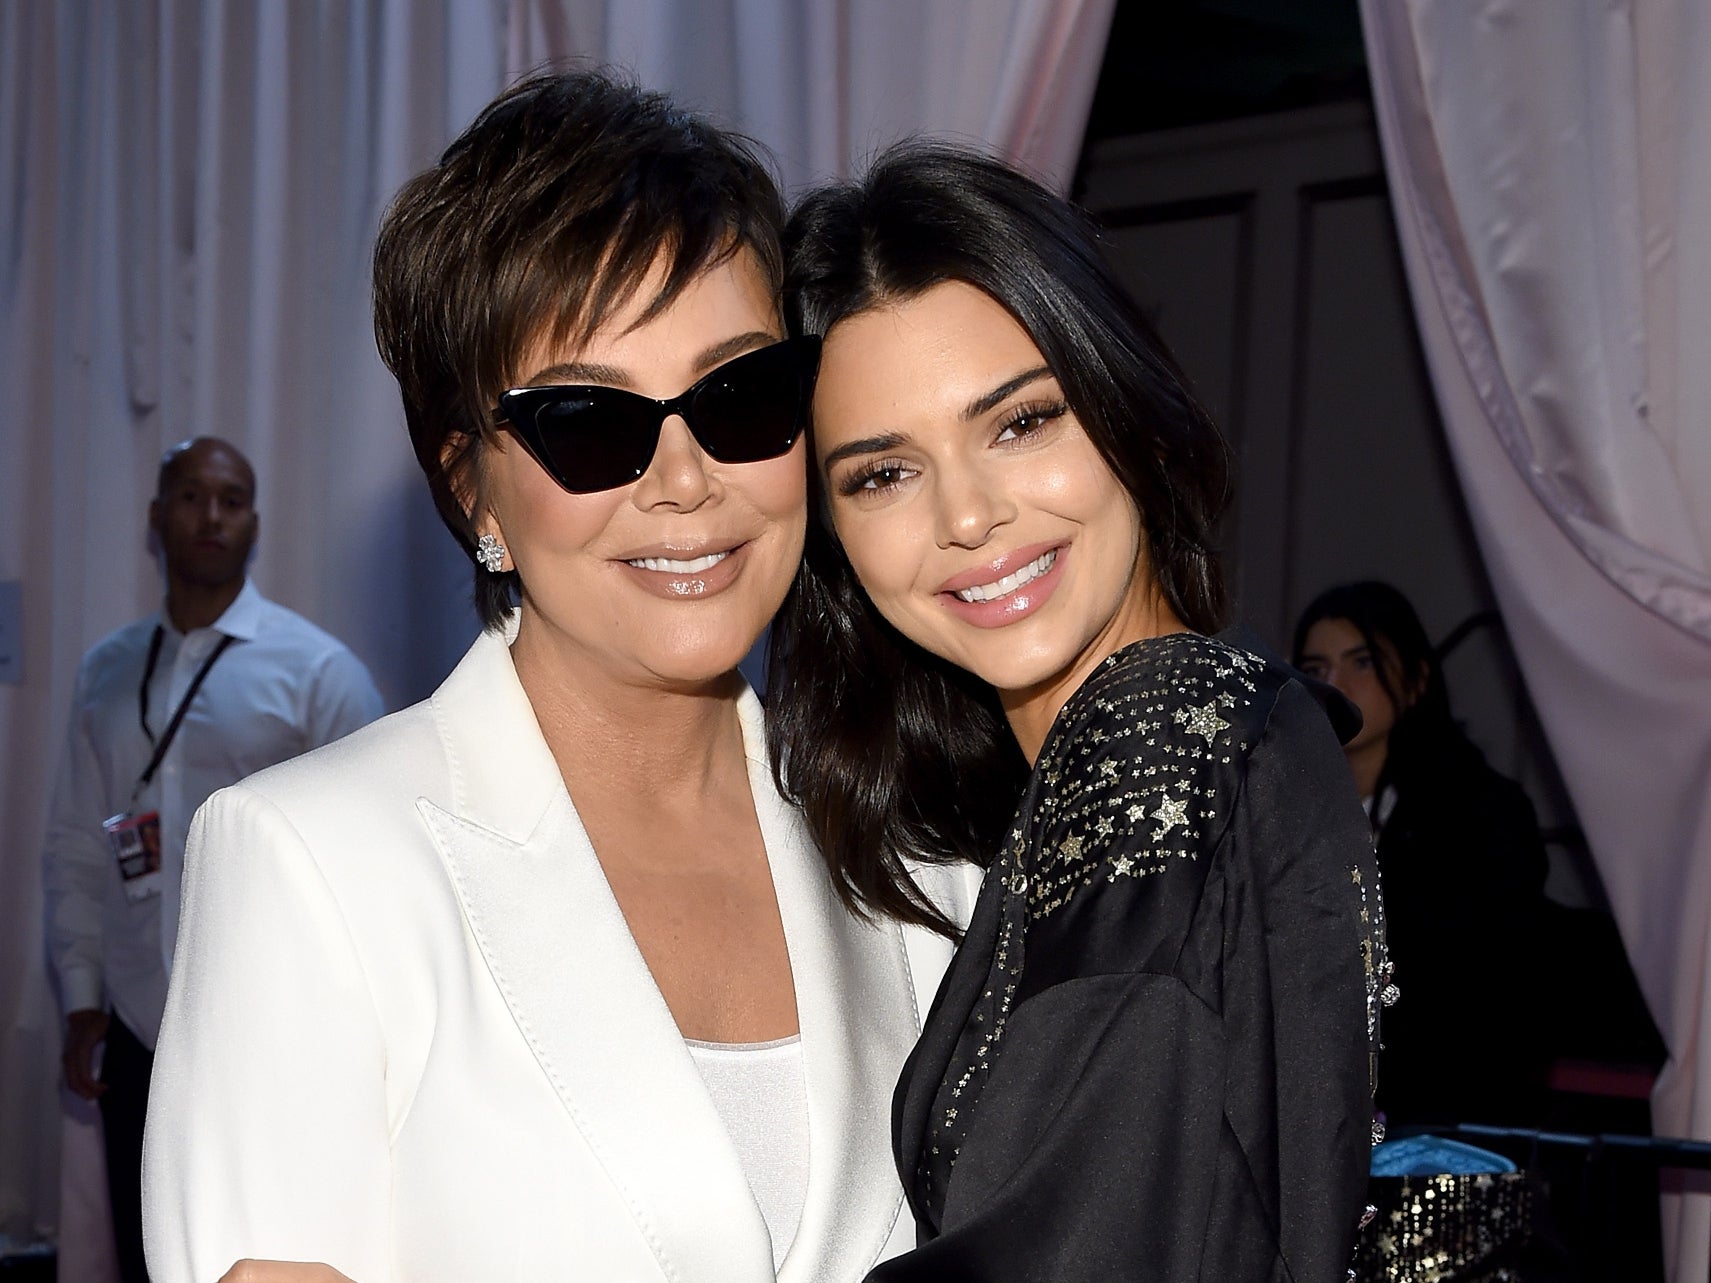 Kris Jenner says Kendall would love to have children one day